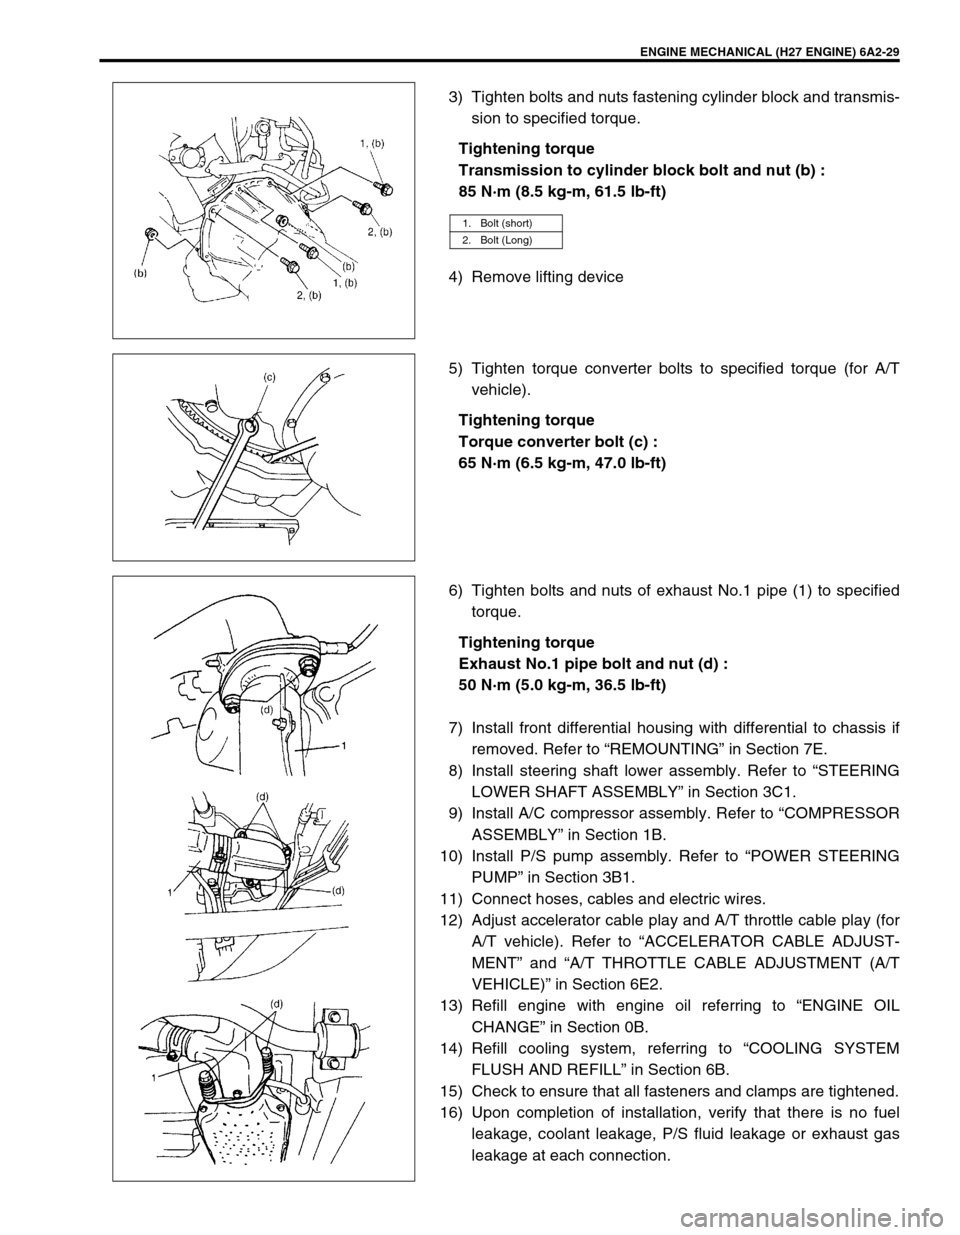 SUZUKI GRAND VITARA 2001 2.G Owners Manual ENGINE MECHANICAL (H27 ENGINE) 6A2-29
3) Tighten bolts and nuts fastening cylinder block and transmis-
sion to specified torque.
Tightening torque
Transmission to cylinder block bolt and nut (b) :
85 